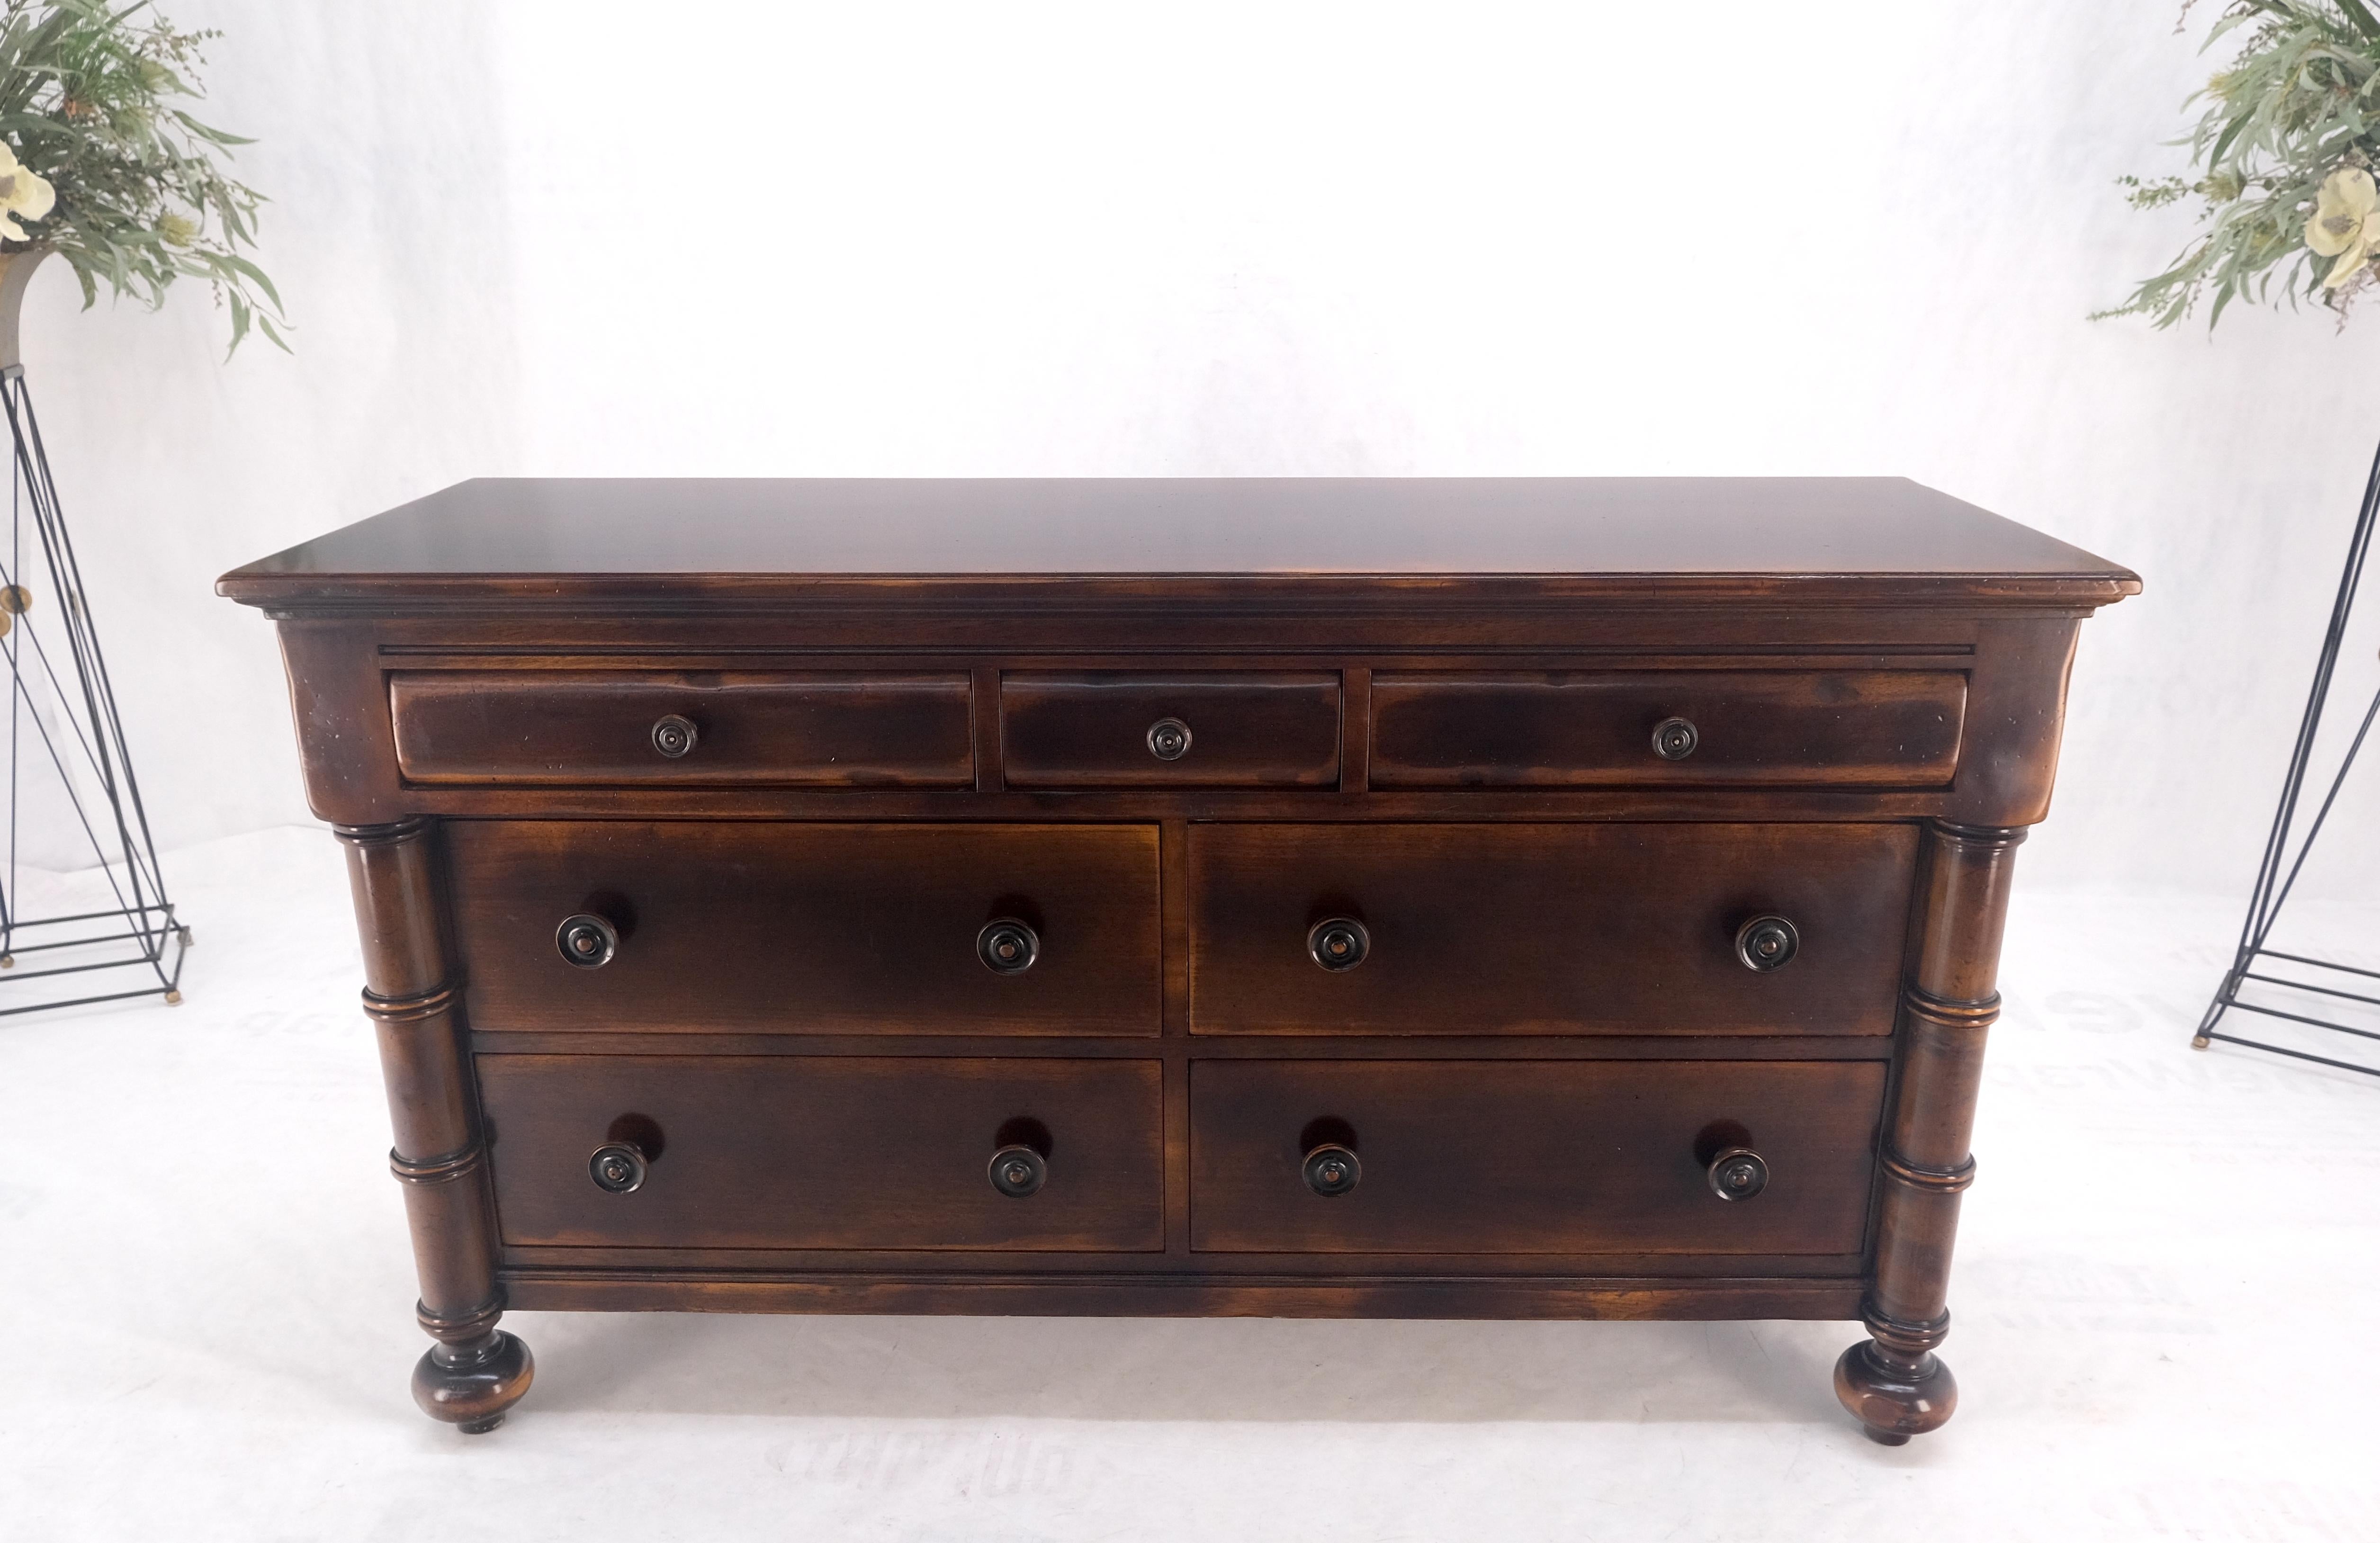 Lacquered Large 7 Drawer Faux Bamboo Legs Turned Knobs Italian Dresser Commode Chest MINT! For Sale